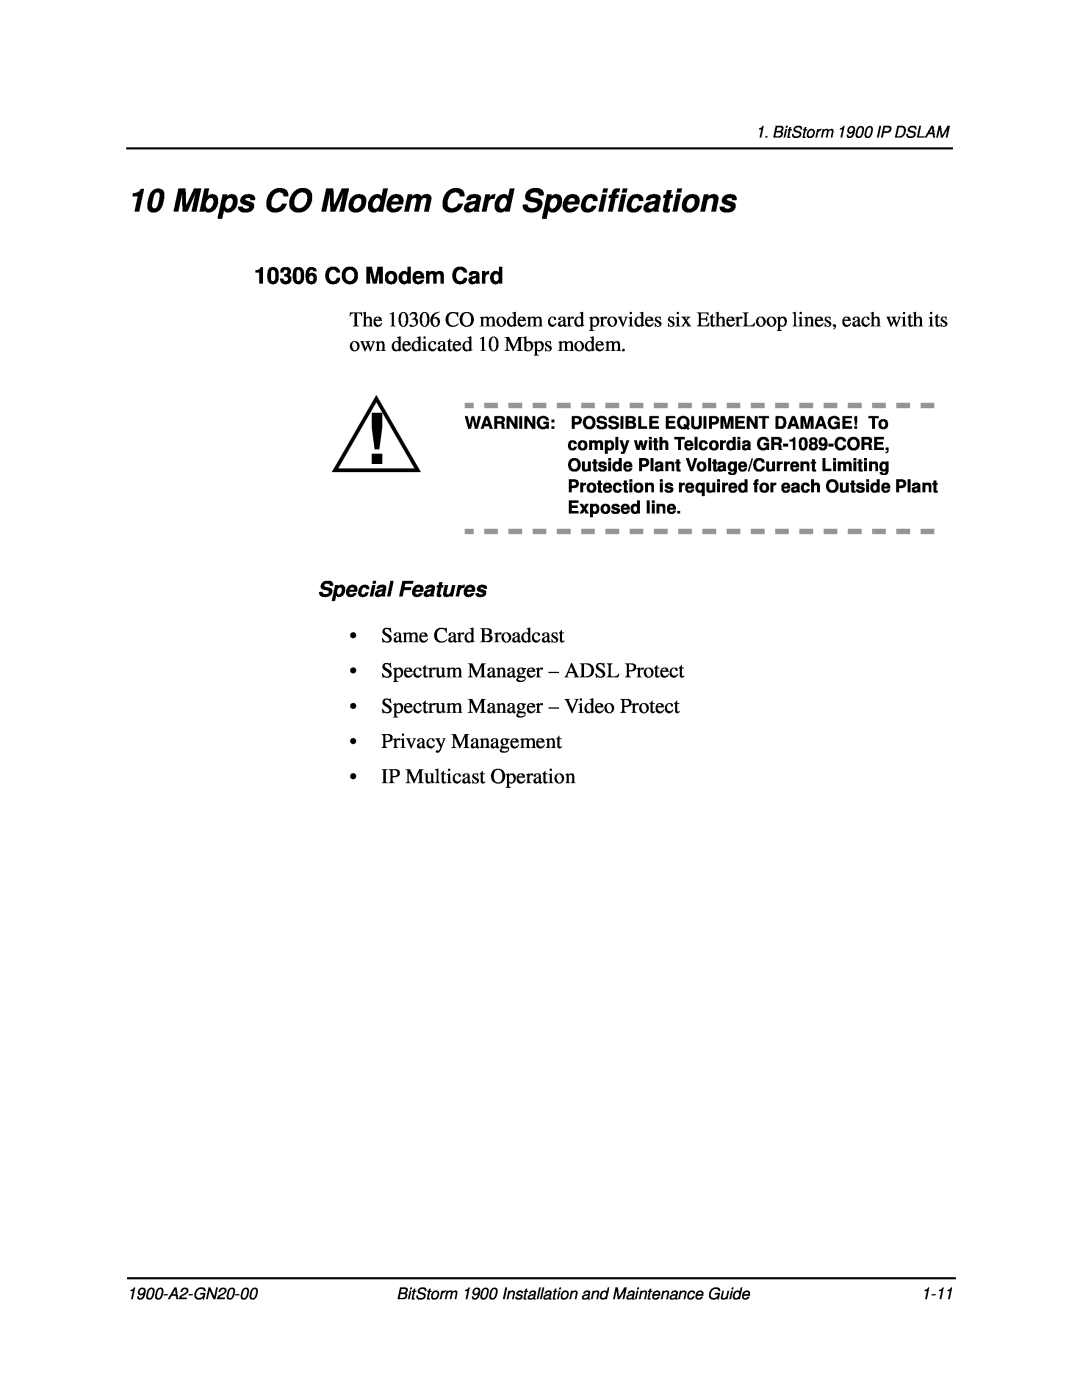 Paradyne 1900 manual Mbps CO Modem Card Specifications, Special Features 